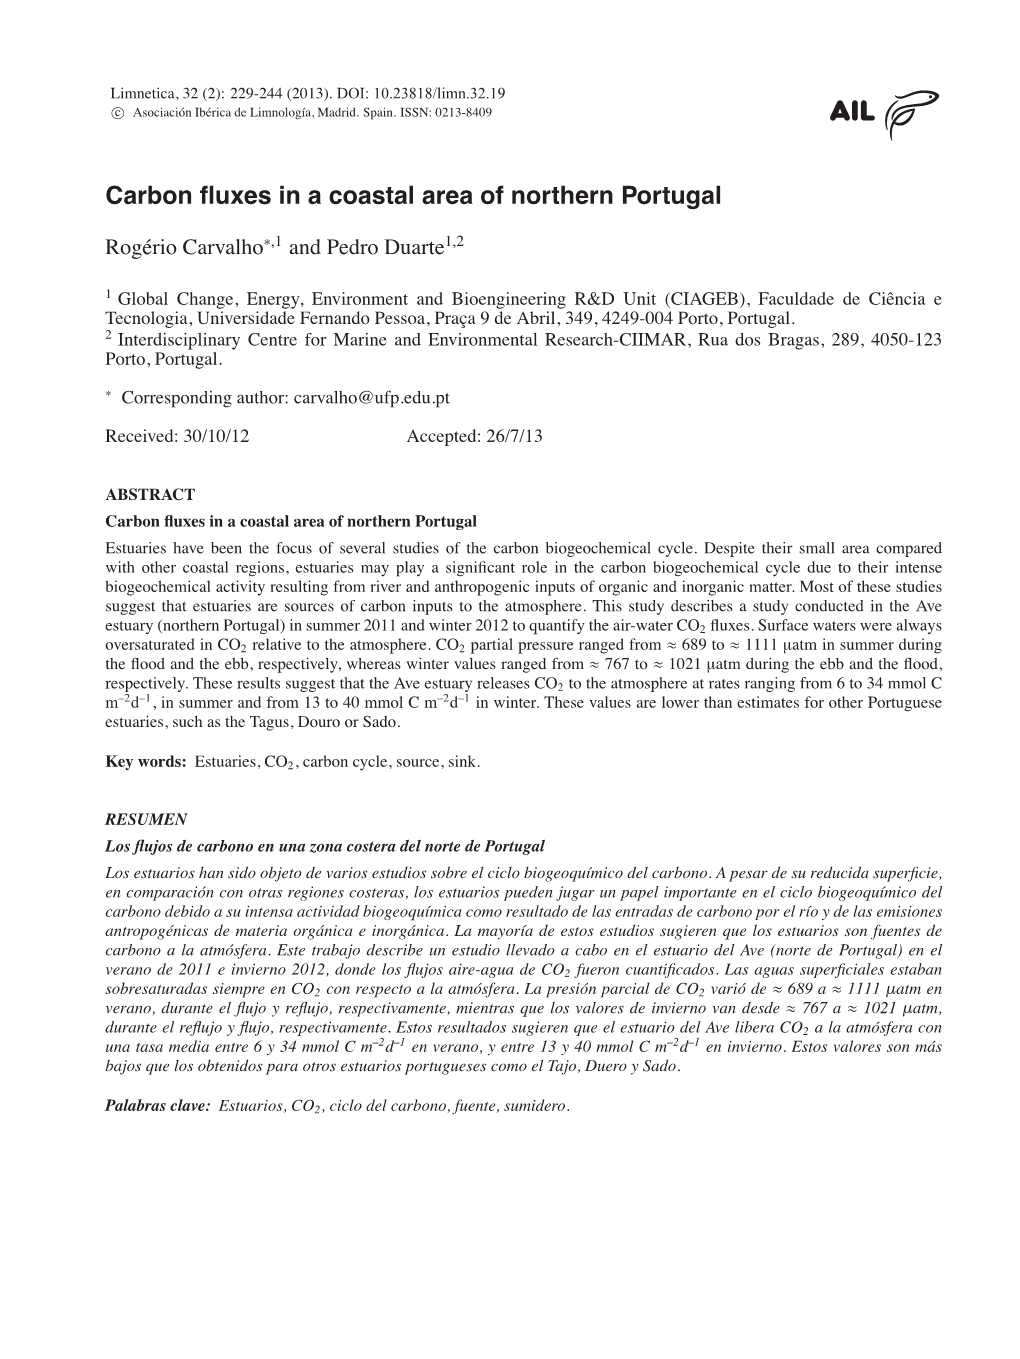 Carbon Fluxes in a Coastal Area of Northern Portugal